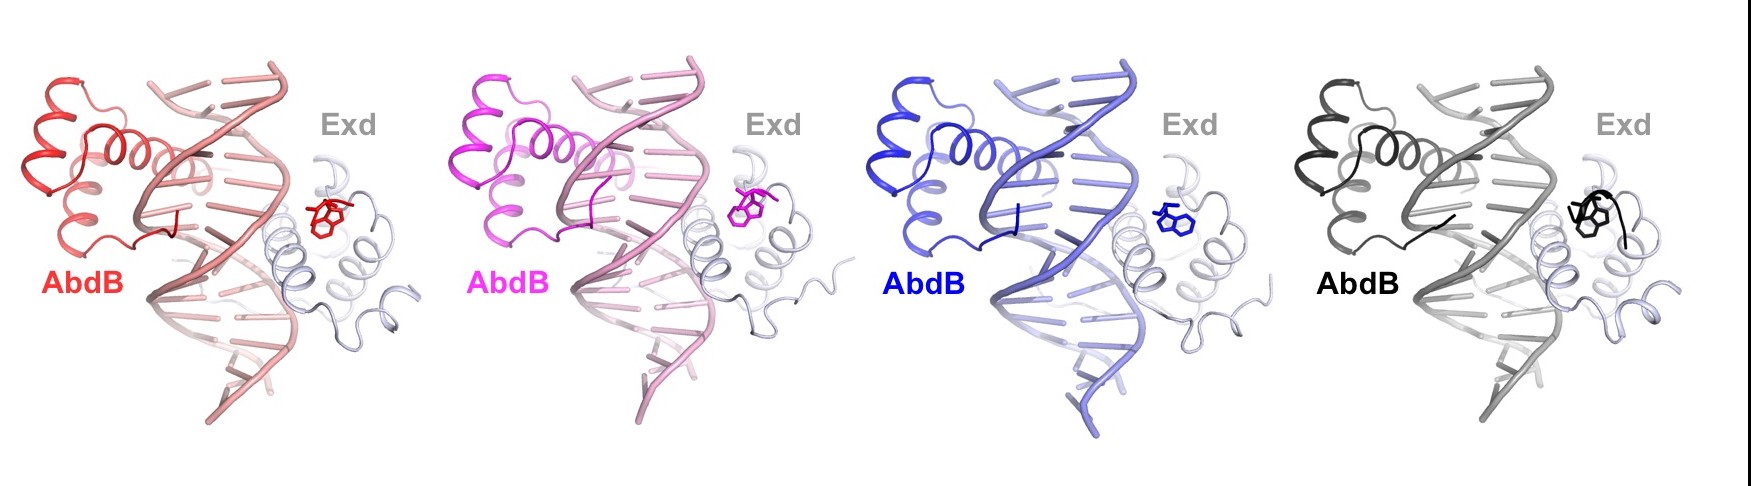 Four x-ray structures of AbdB-Exd bound to four different binding sites